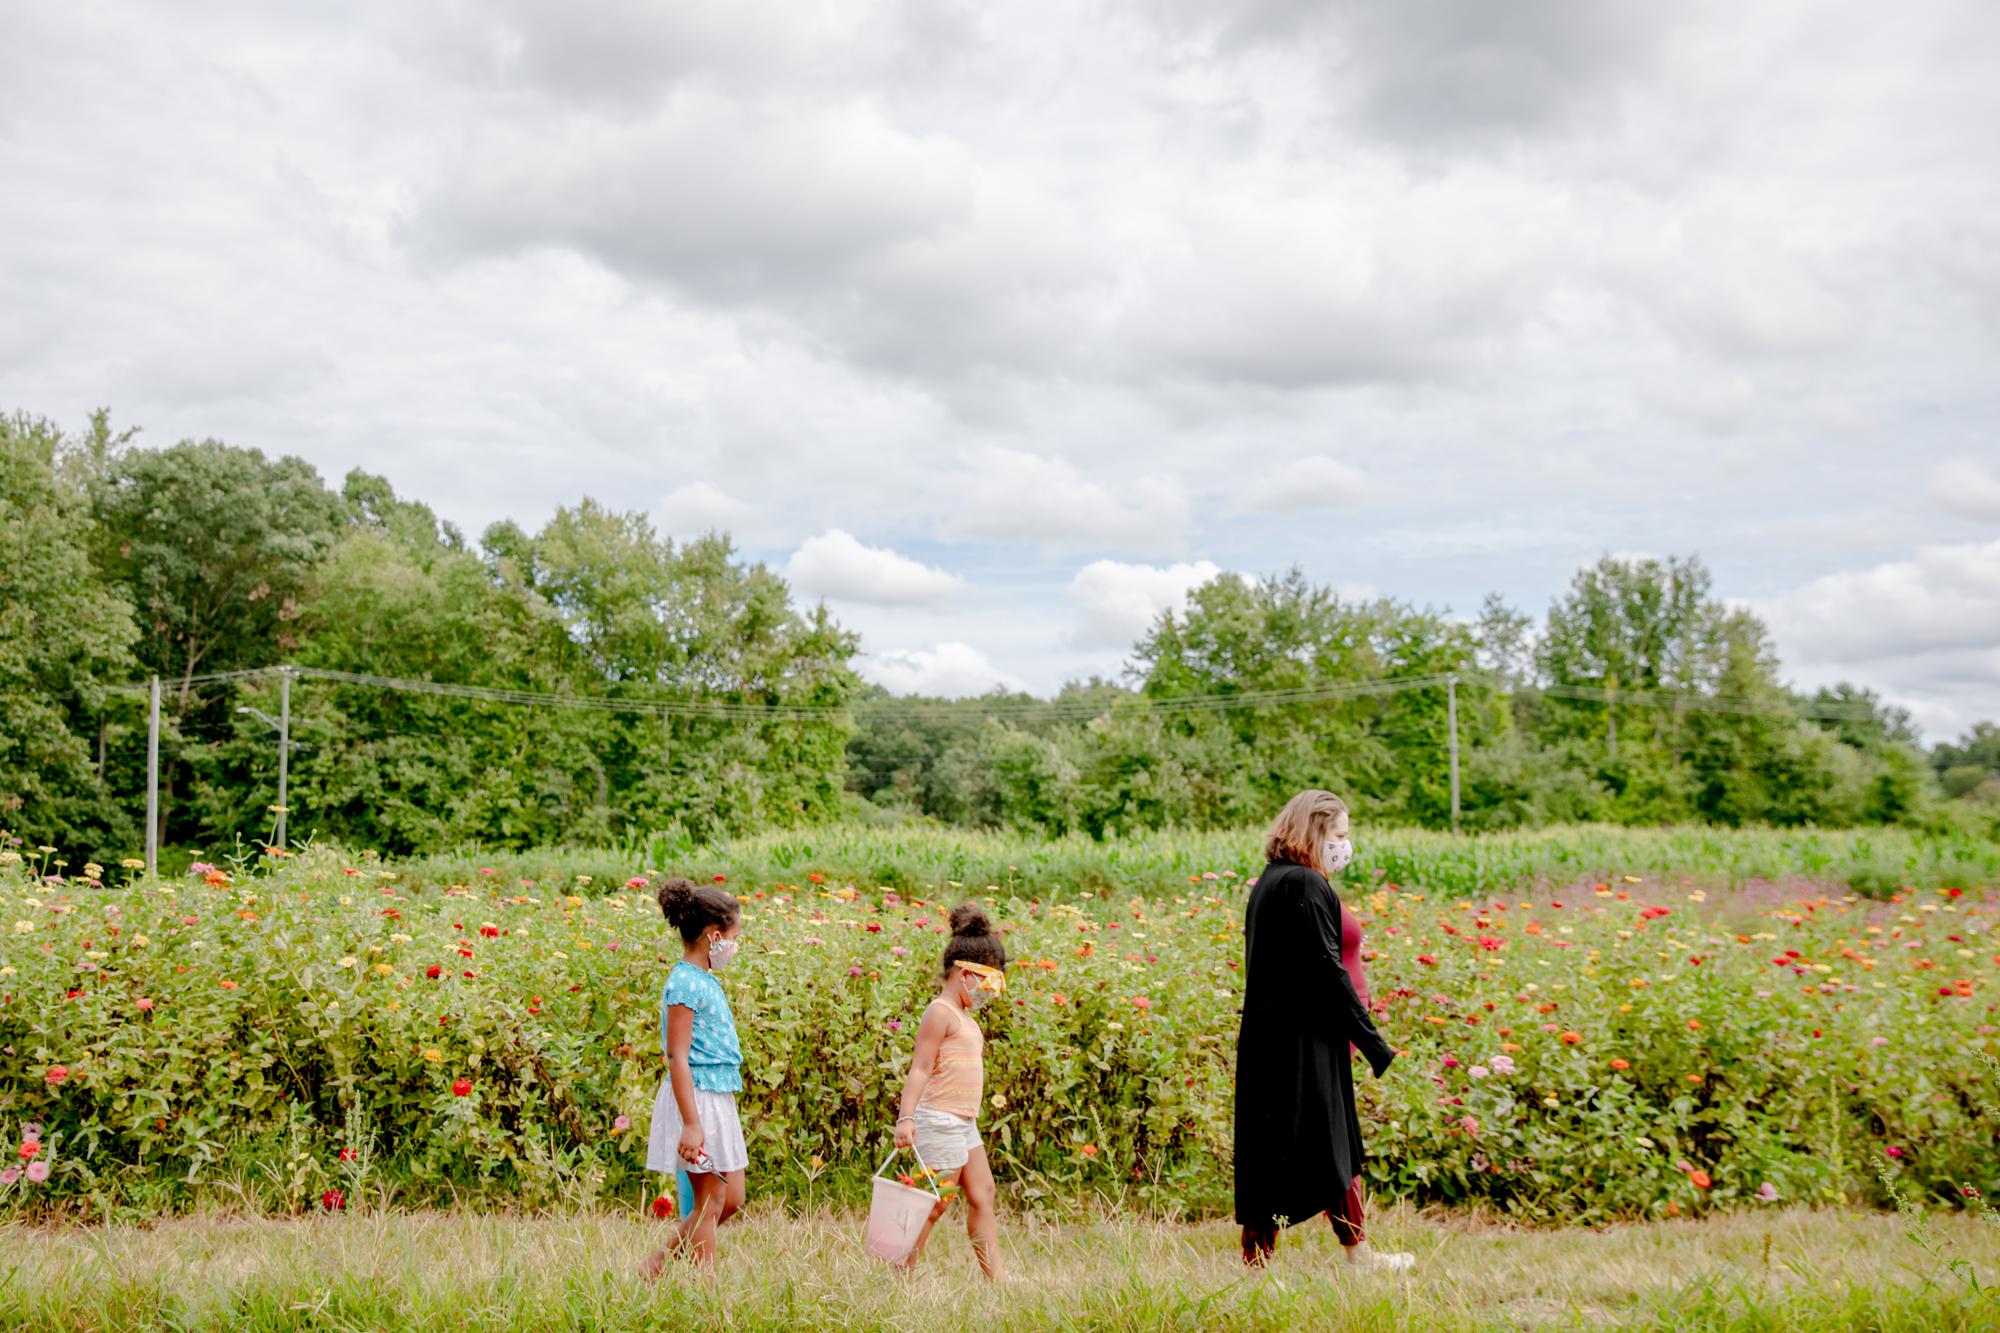 Anya Thompson, 7, Juliet Thompson, 5, and Corie Tracey, left to right, pick flowers at a farm in South Windsor. Her family replaced their summer vacation with small outdoor activities they can enjoy while social distancing. After staying home most of the summer, finding ladybugs and smelling flowers at the farm excited the girls. &quot;It&#39;s the challenge of making sure that they&#39;re not bored all day,&quot; Tracey said.